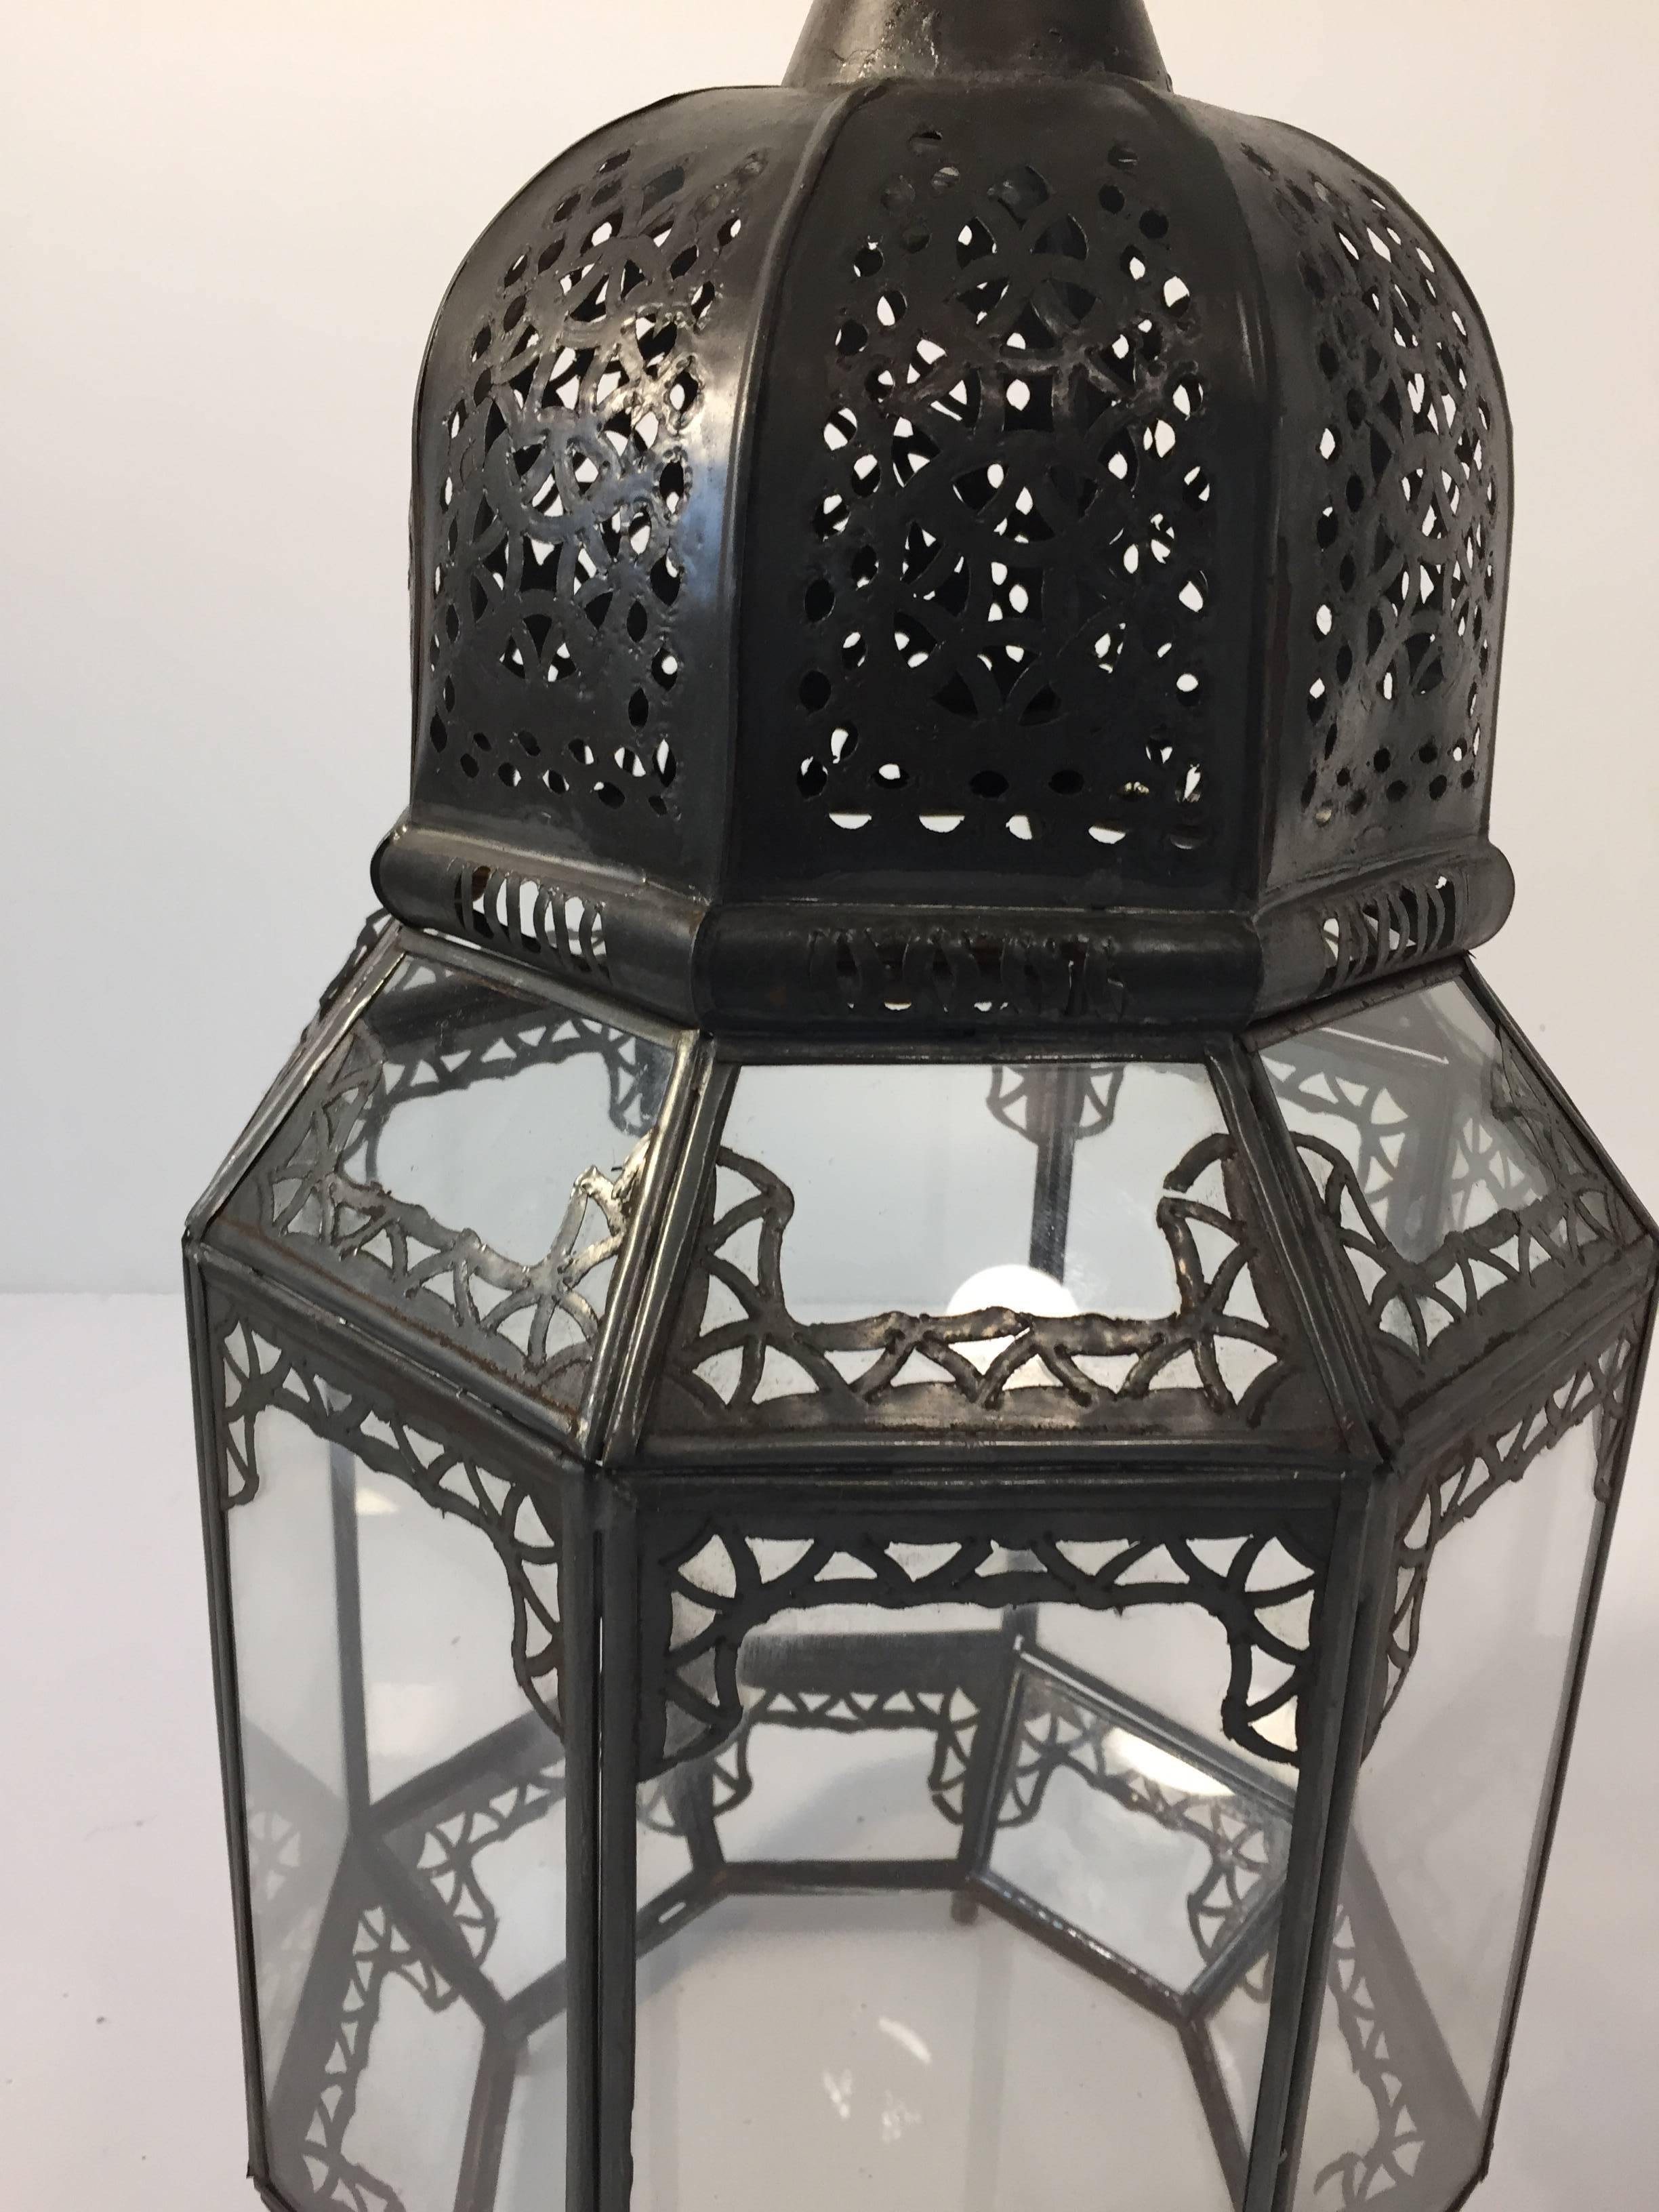 Vintage Moroccan Moorish Octagonal Metal and Glass Candle Lantern In Good Condition For Sale In North Hollywood, CA